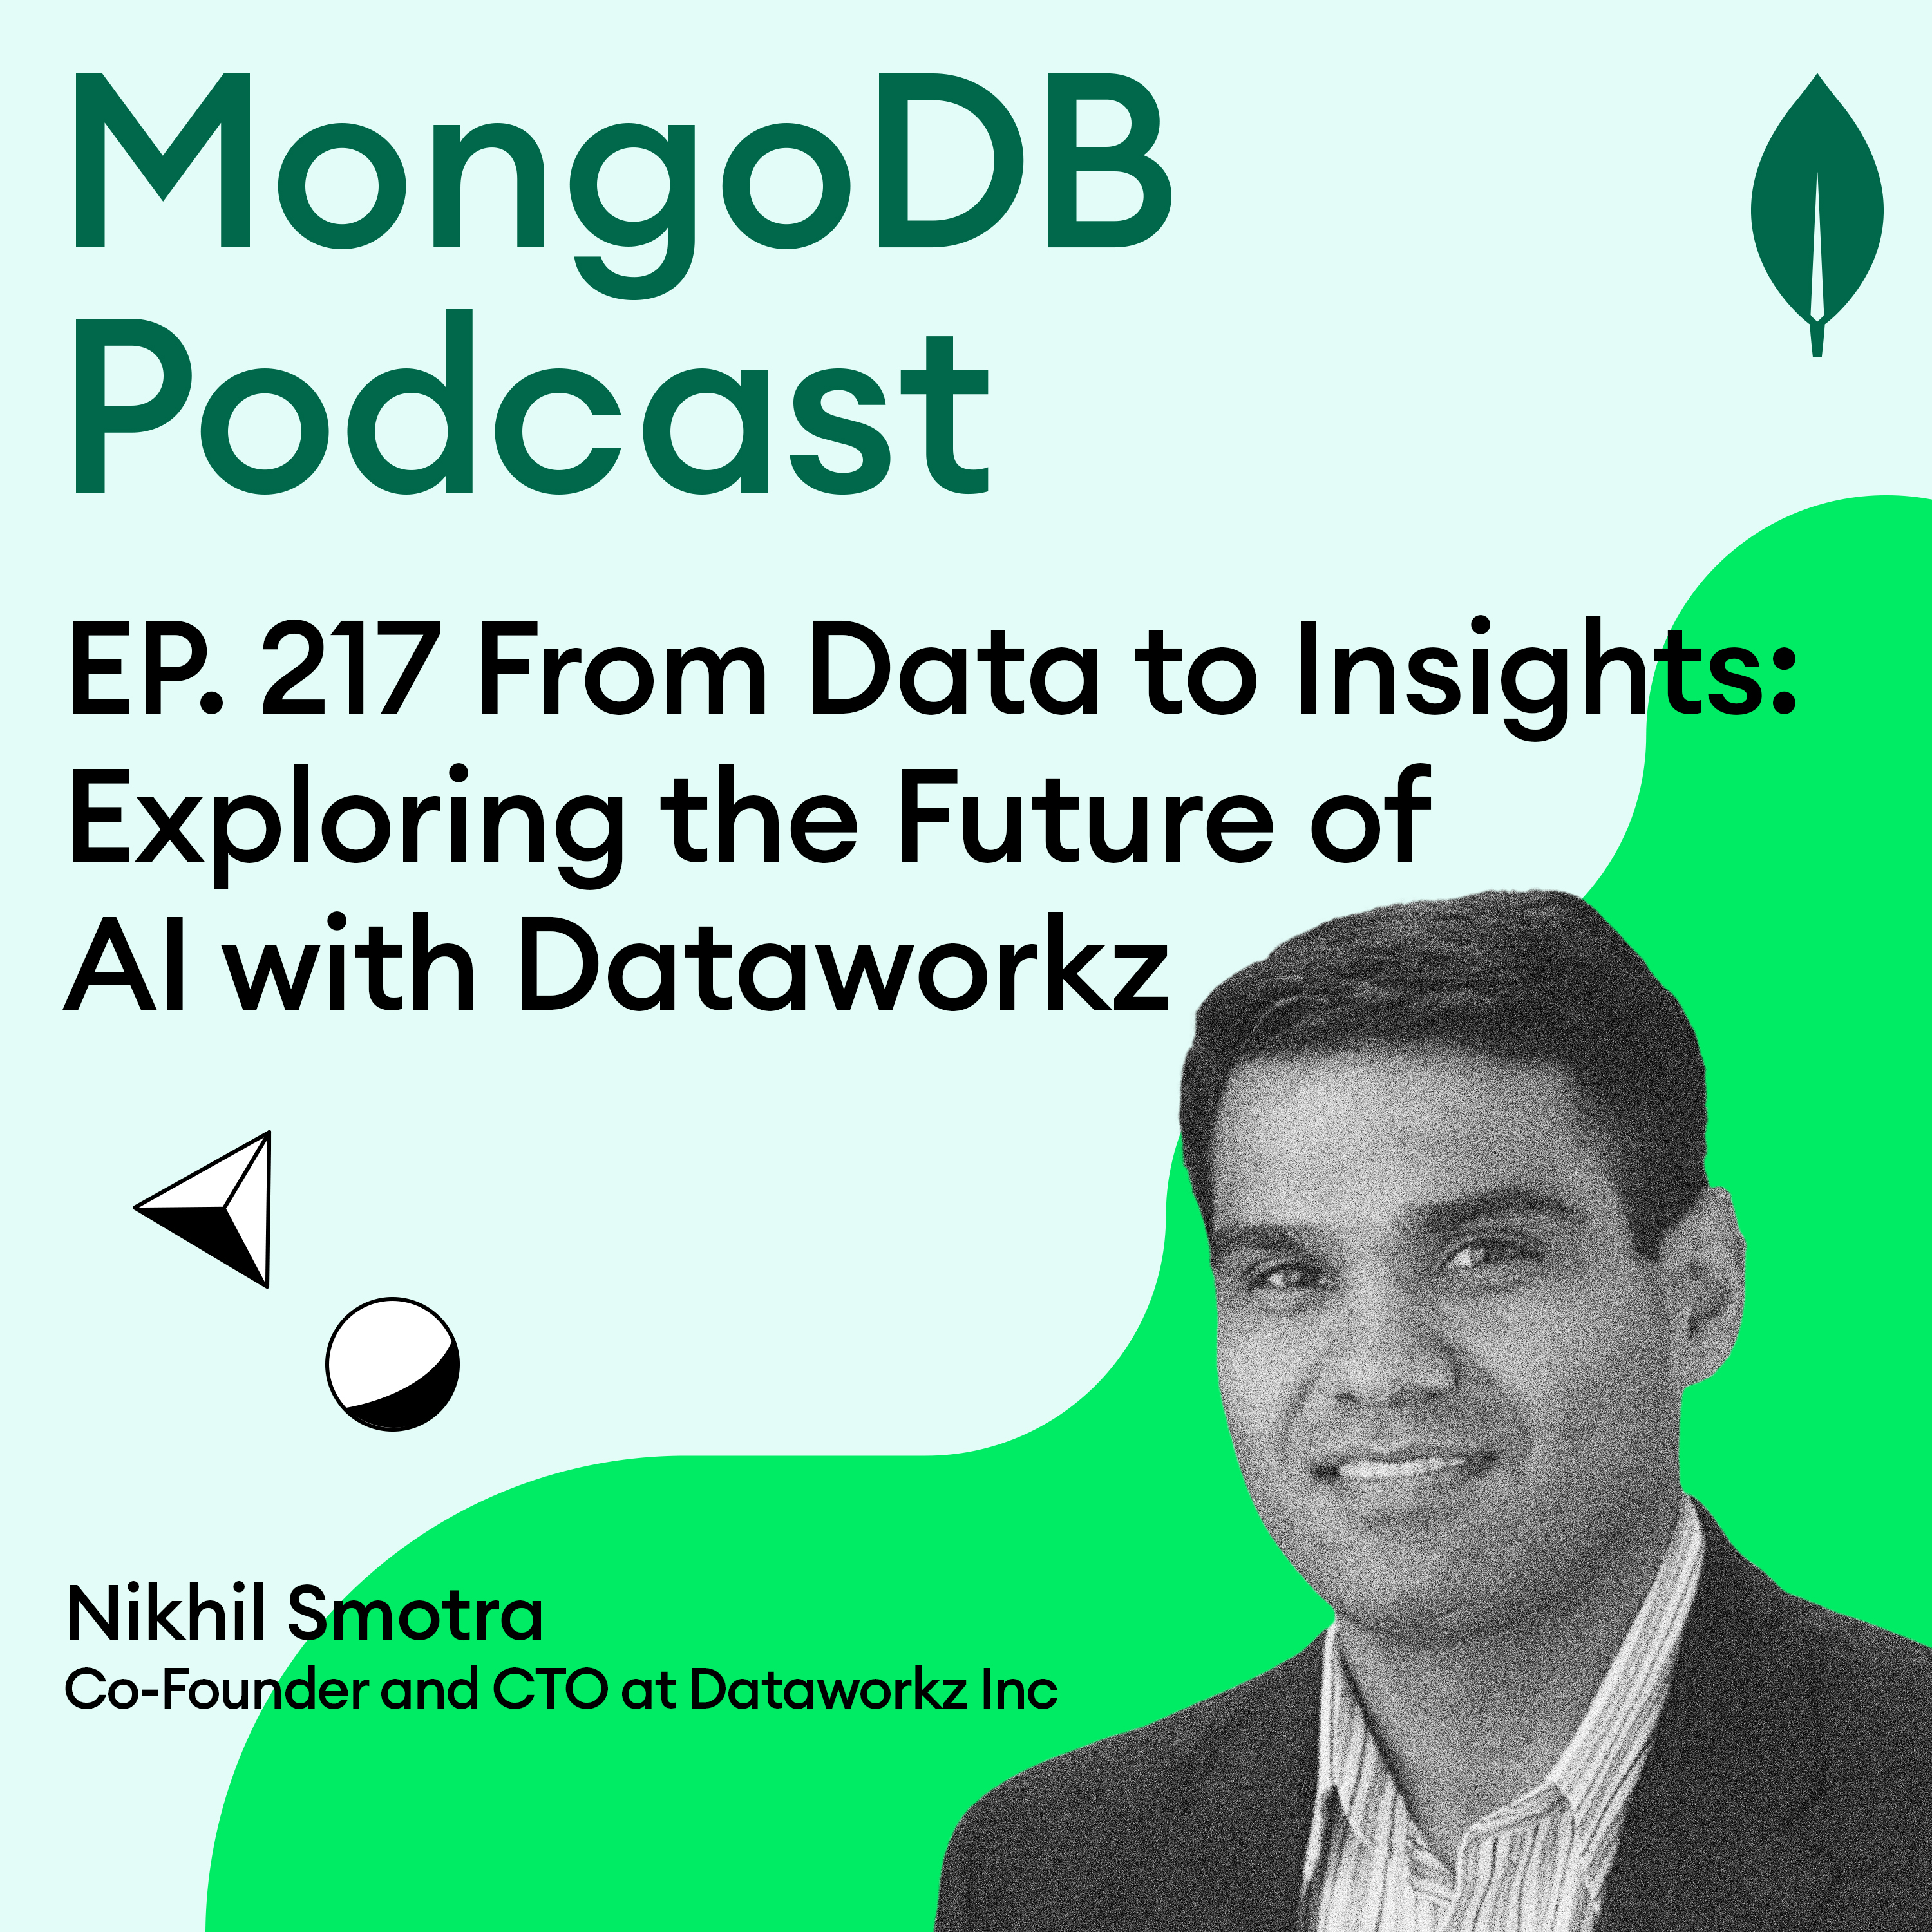 EP. 217 From Data to Insights: Exploring the Future of AI with Dataworkz